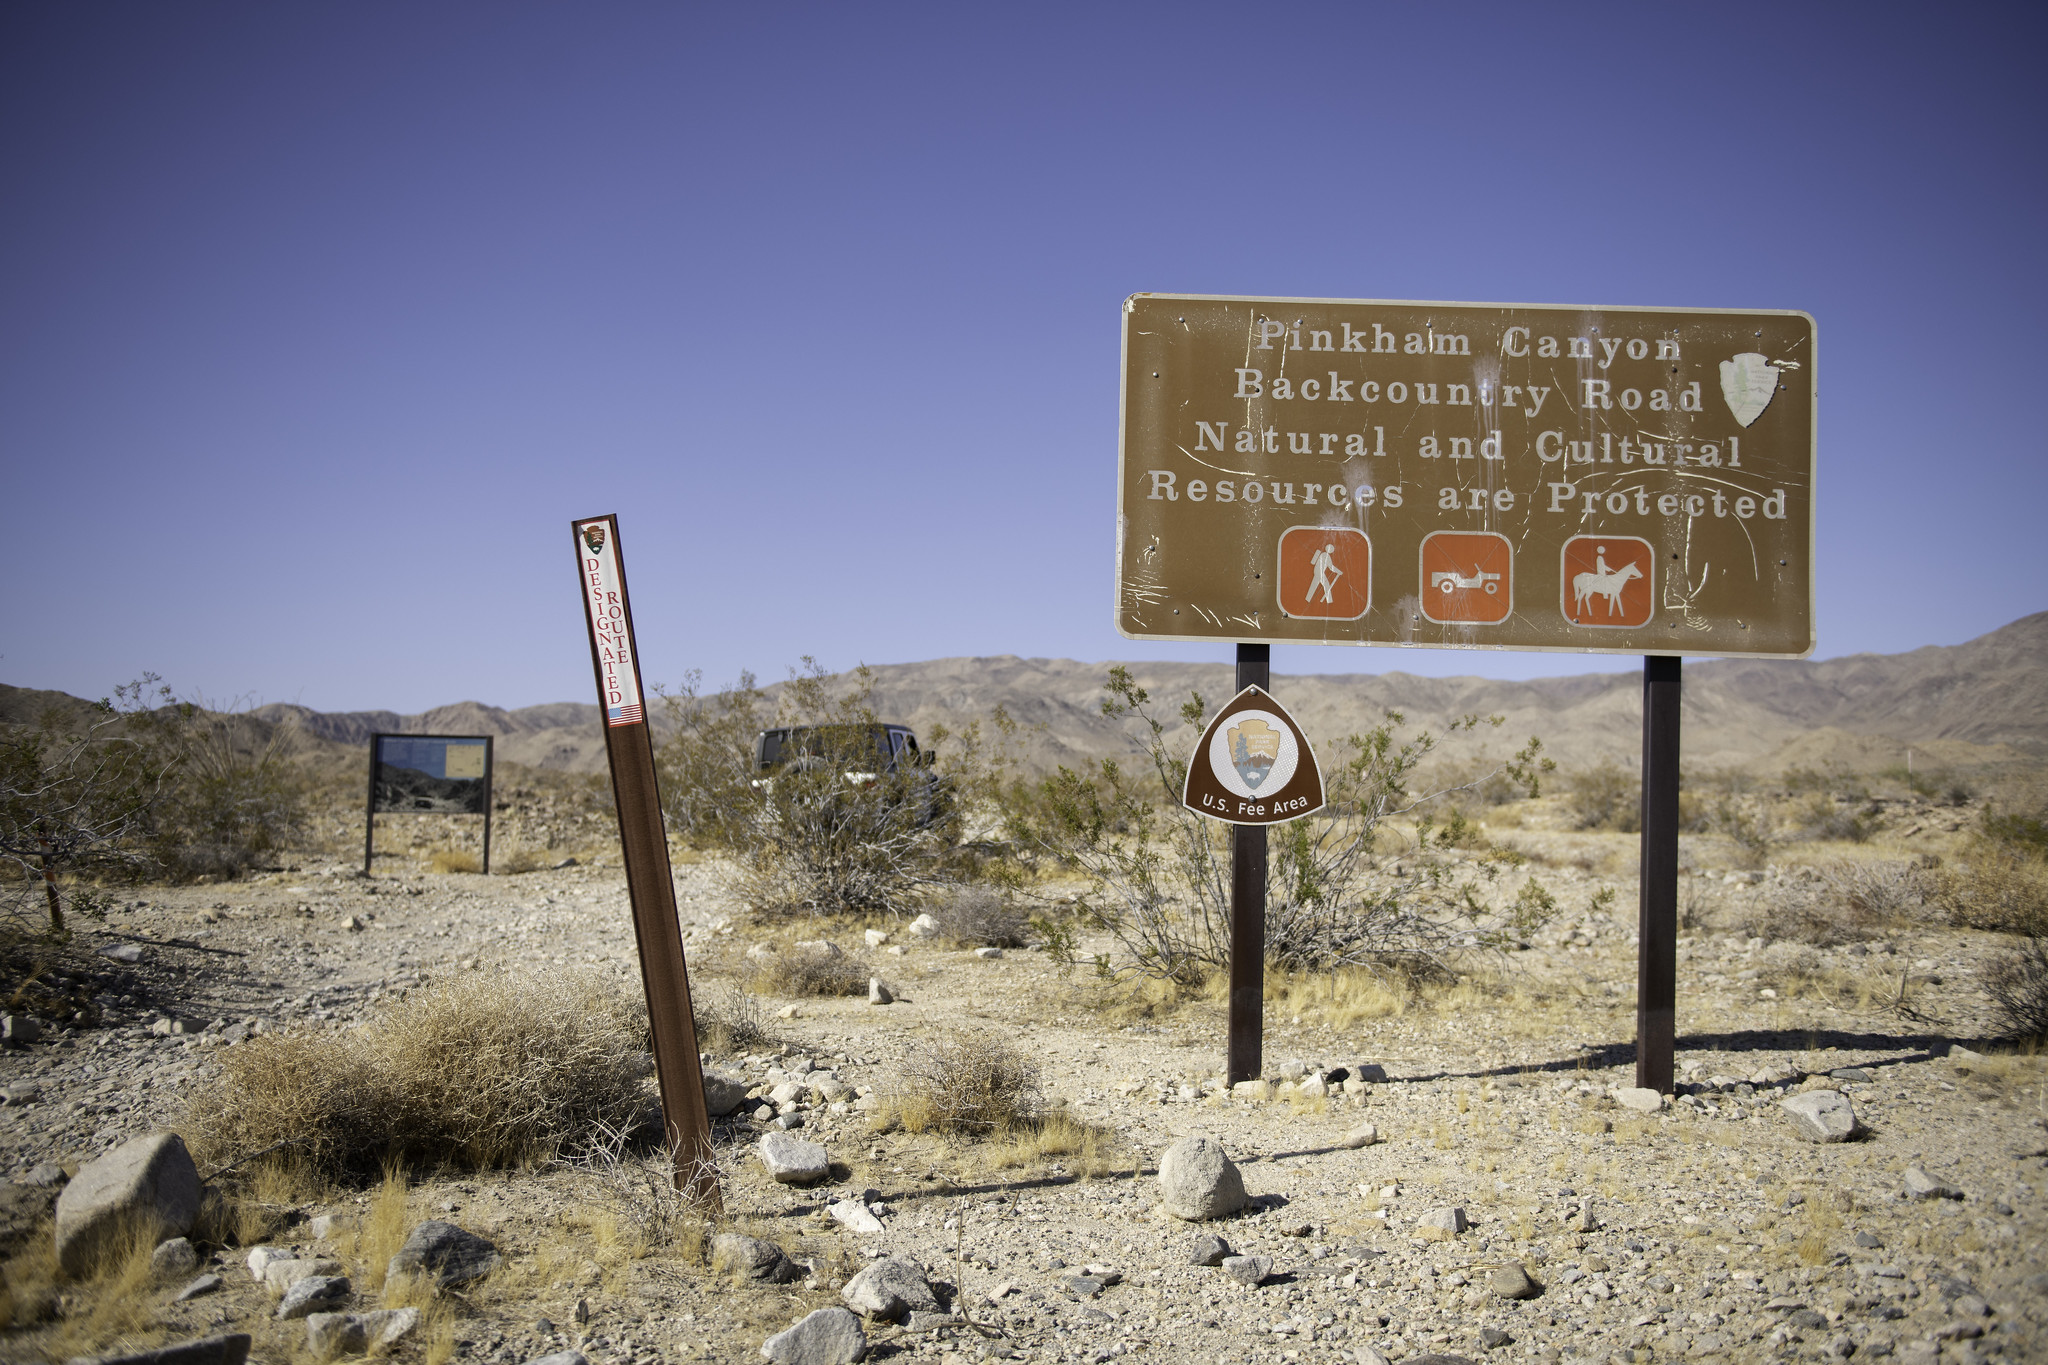 A variety of signs indicating the beginning of Pinkham Canyon Road next to a rocky dirt road.